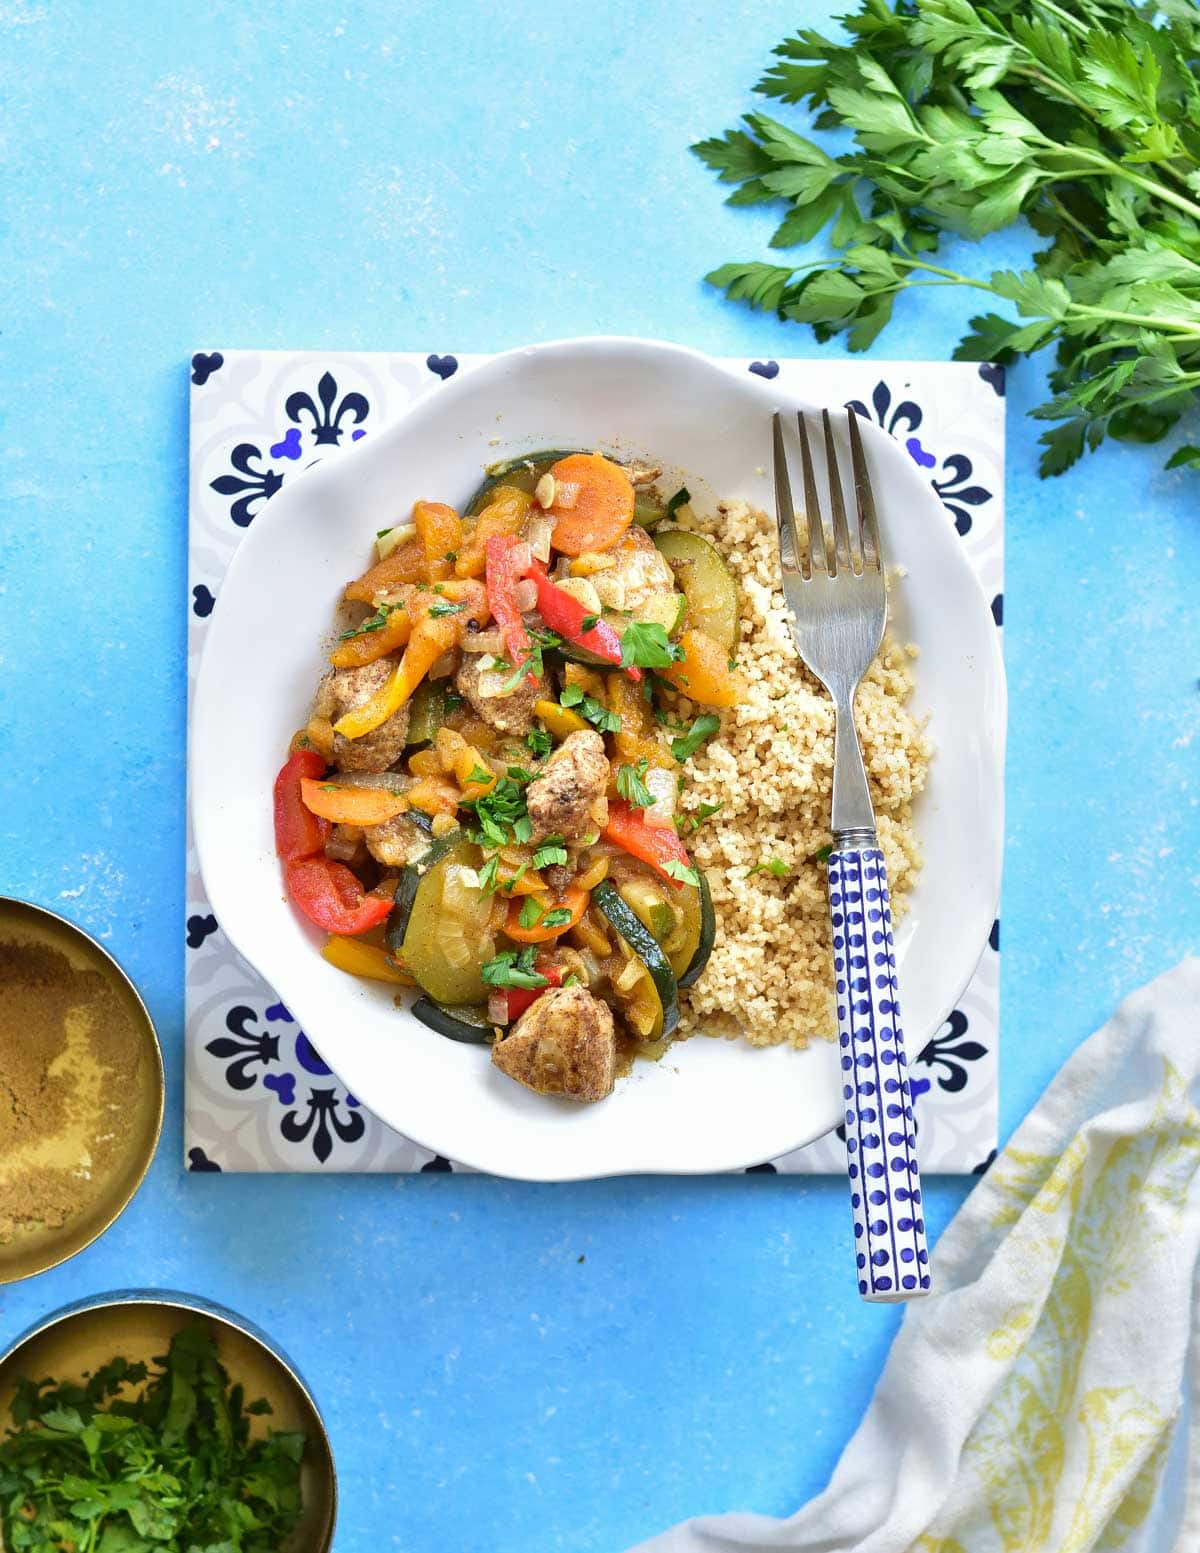 Moroccan chicken with dried apricots, vegetables and parsley couscous in a white plate on a blue background